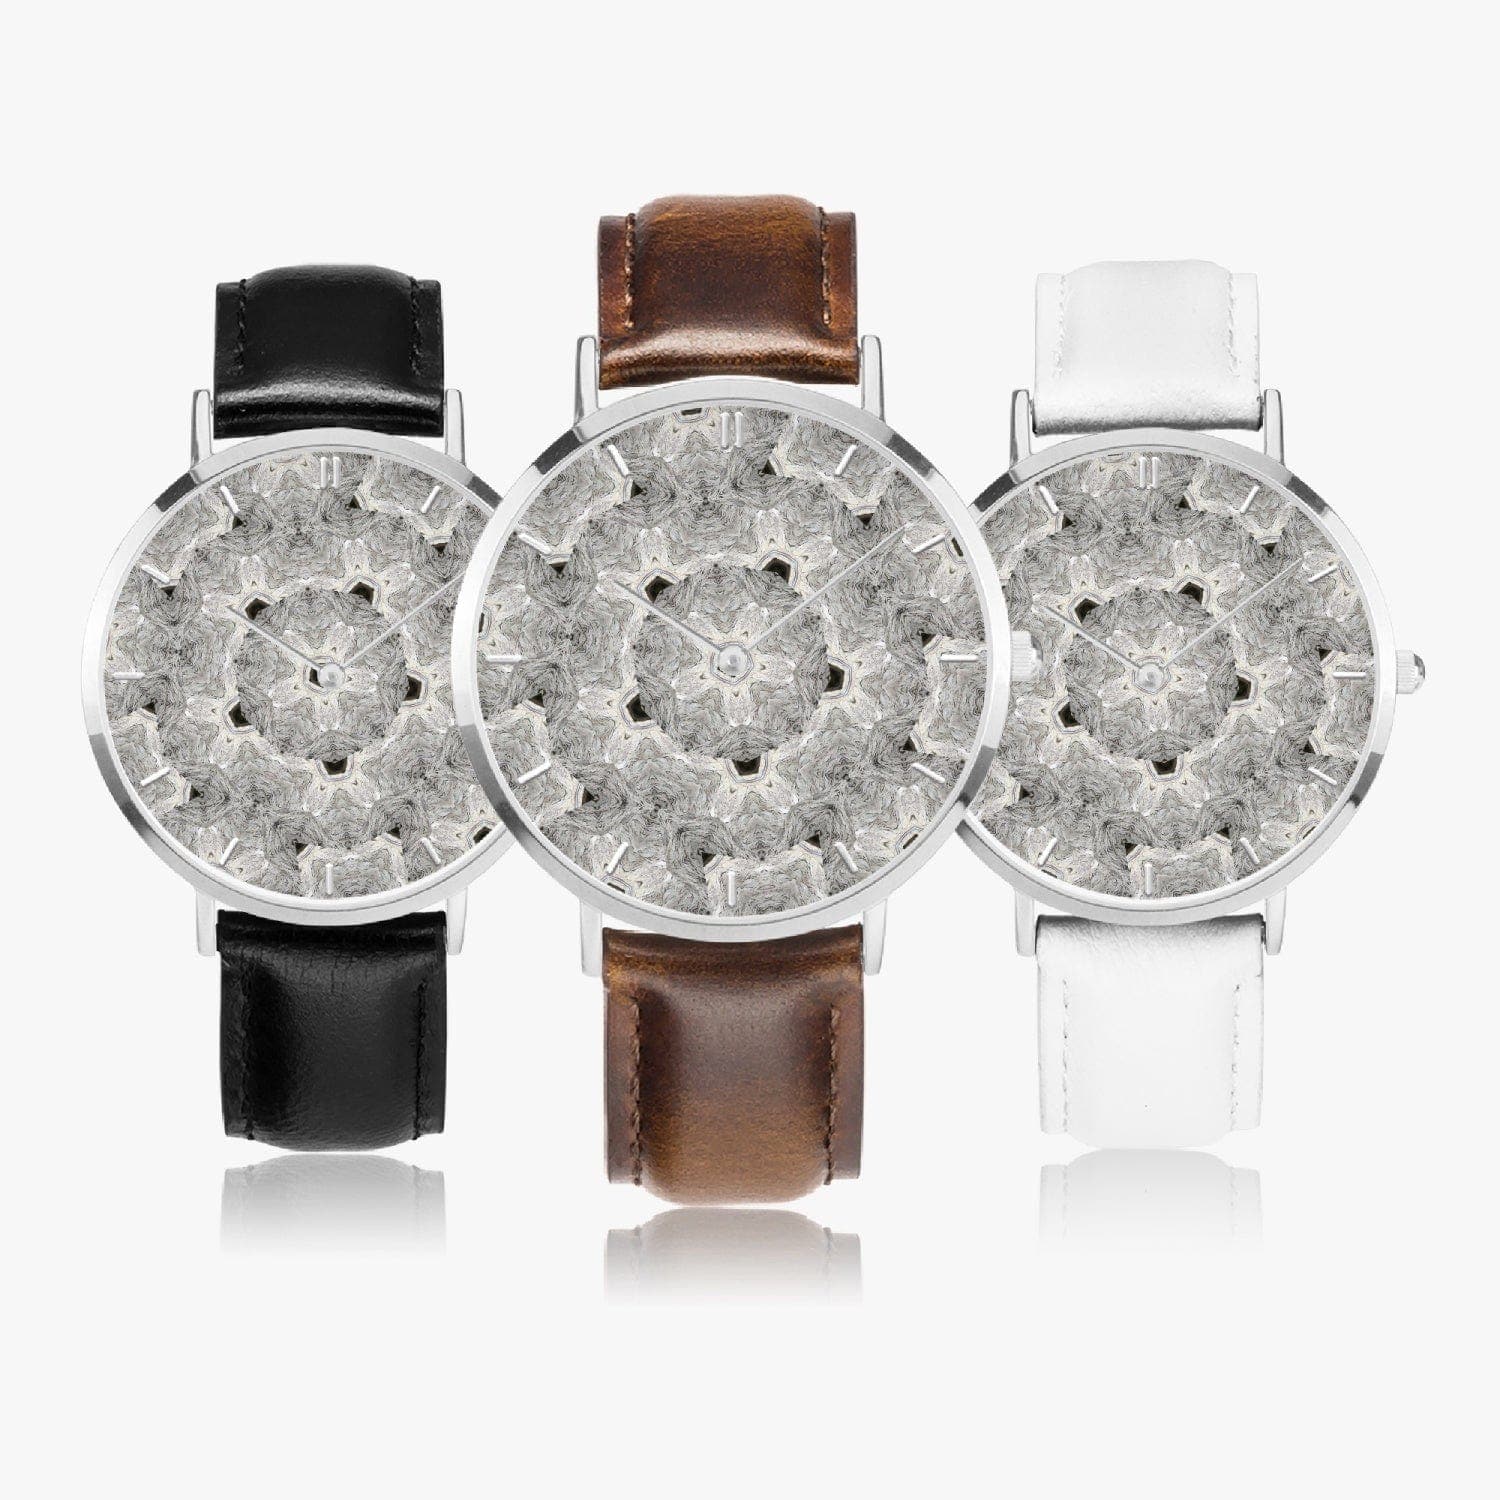 Ruin Staircase mosaïc,  Hot Selling Ultra-Thin Leather Strap Quartz Watch (Silver With Indicators)by Sensus Studio Design